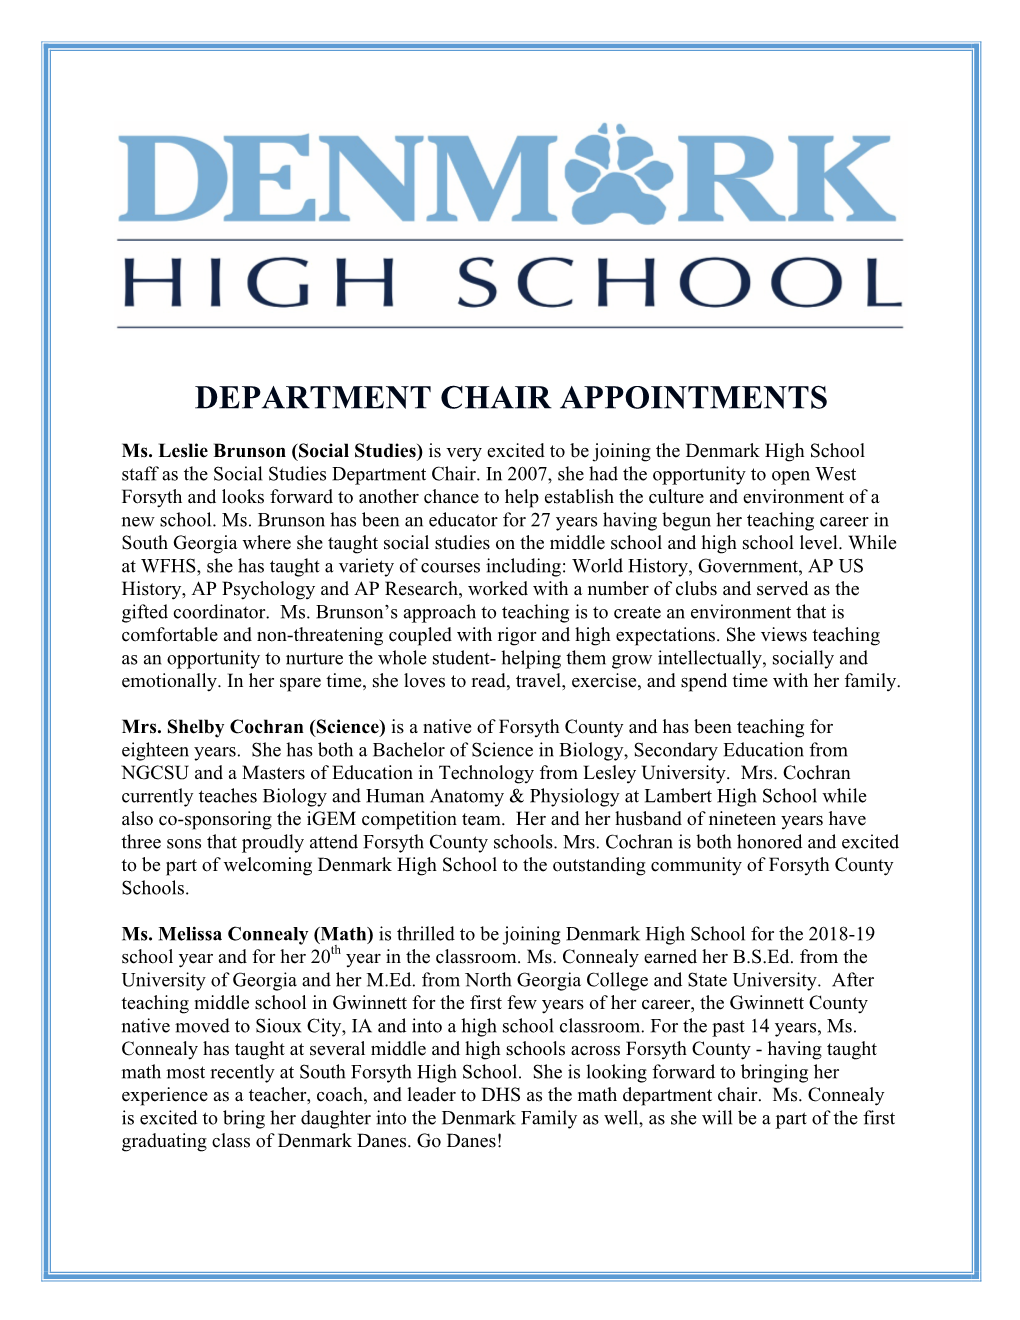 Department Chair Appointments